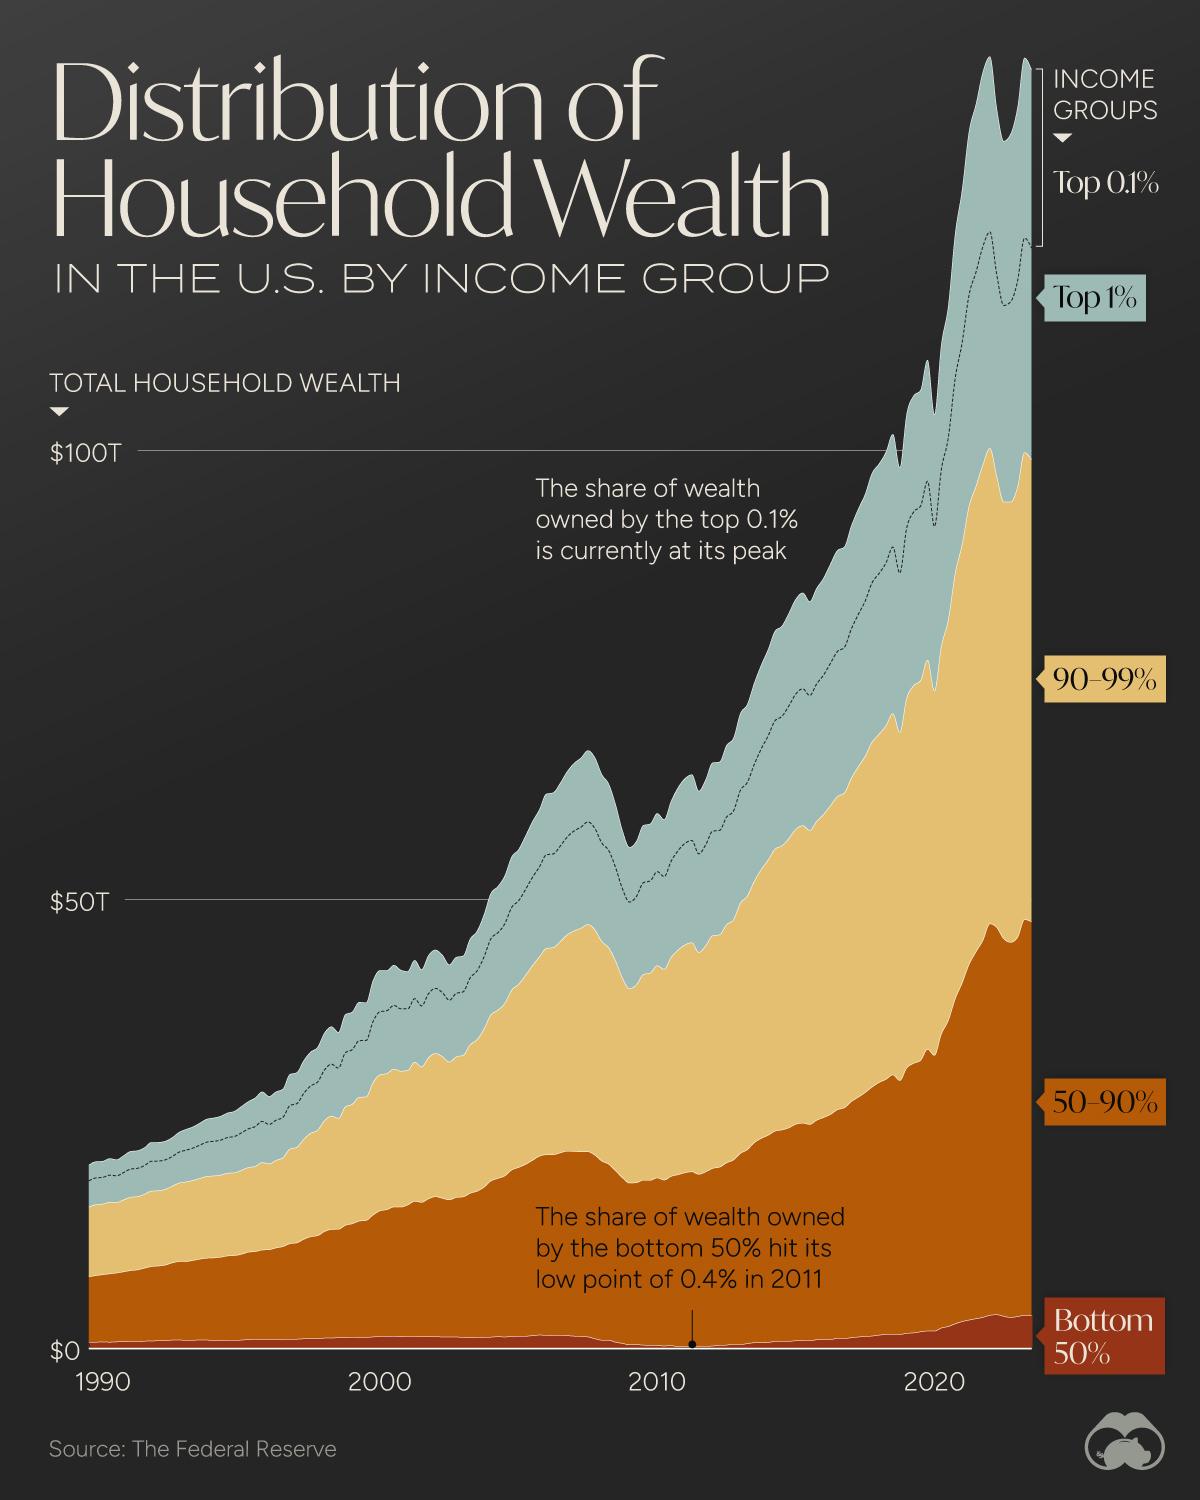 The Top 10% Richest Own Two Thirds of All Household Wealth in the U.S.